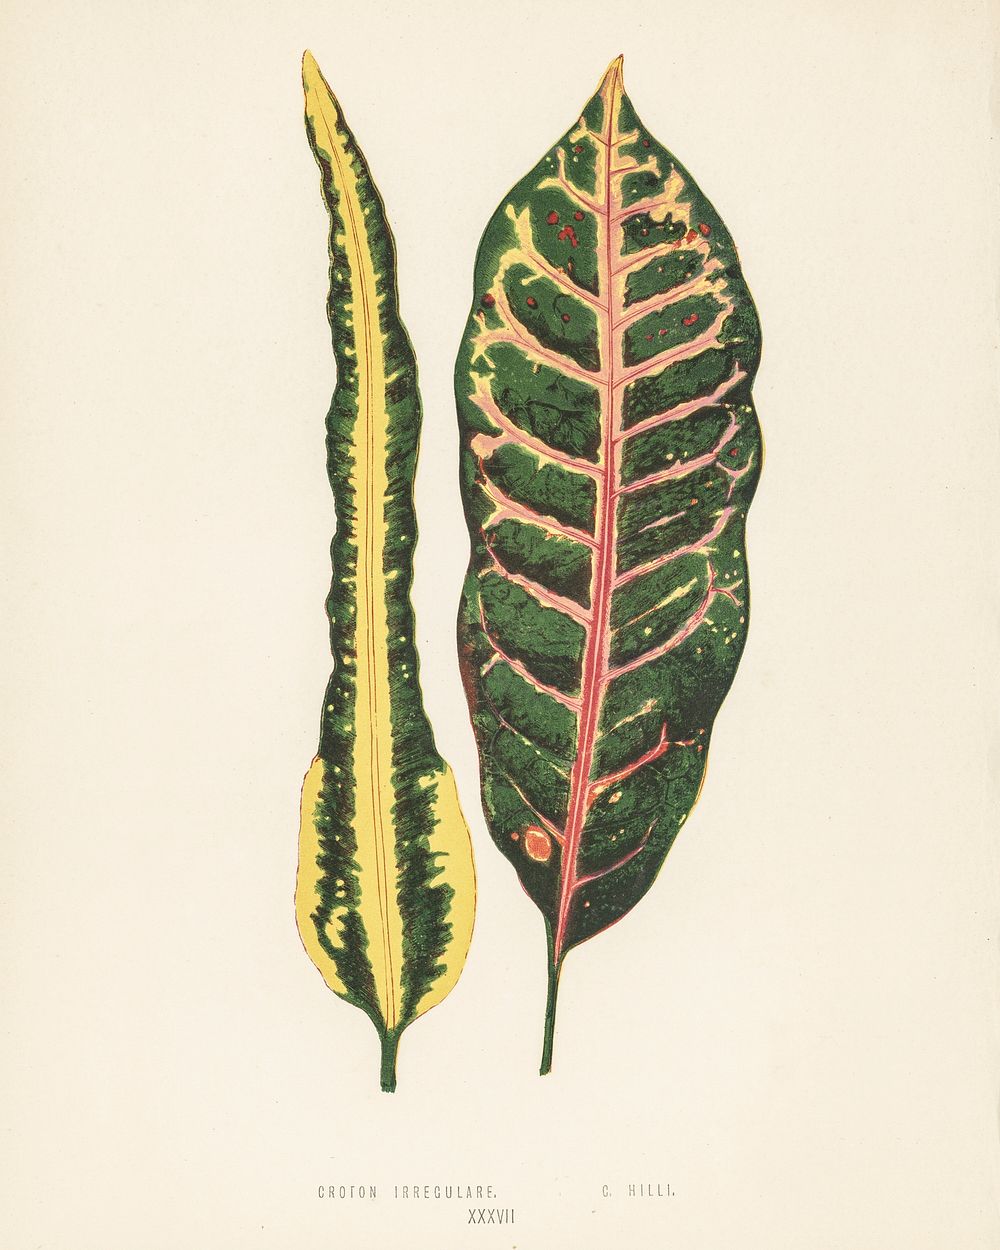 Croton irregulare. Digitally enhanced from our own 1929 edition of New and Rare Beautiful-Leaved Plants by Benjamin Fawcett…